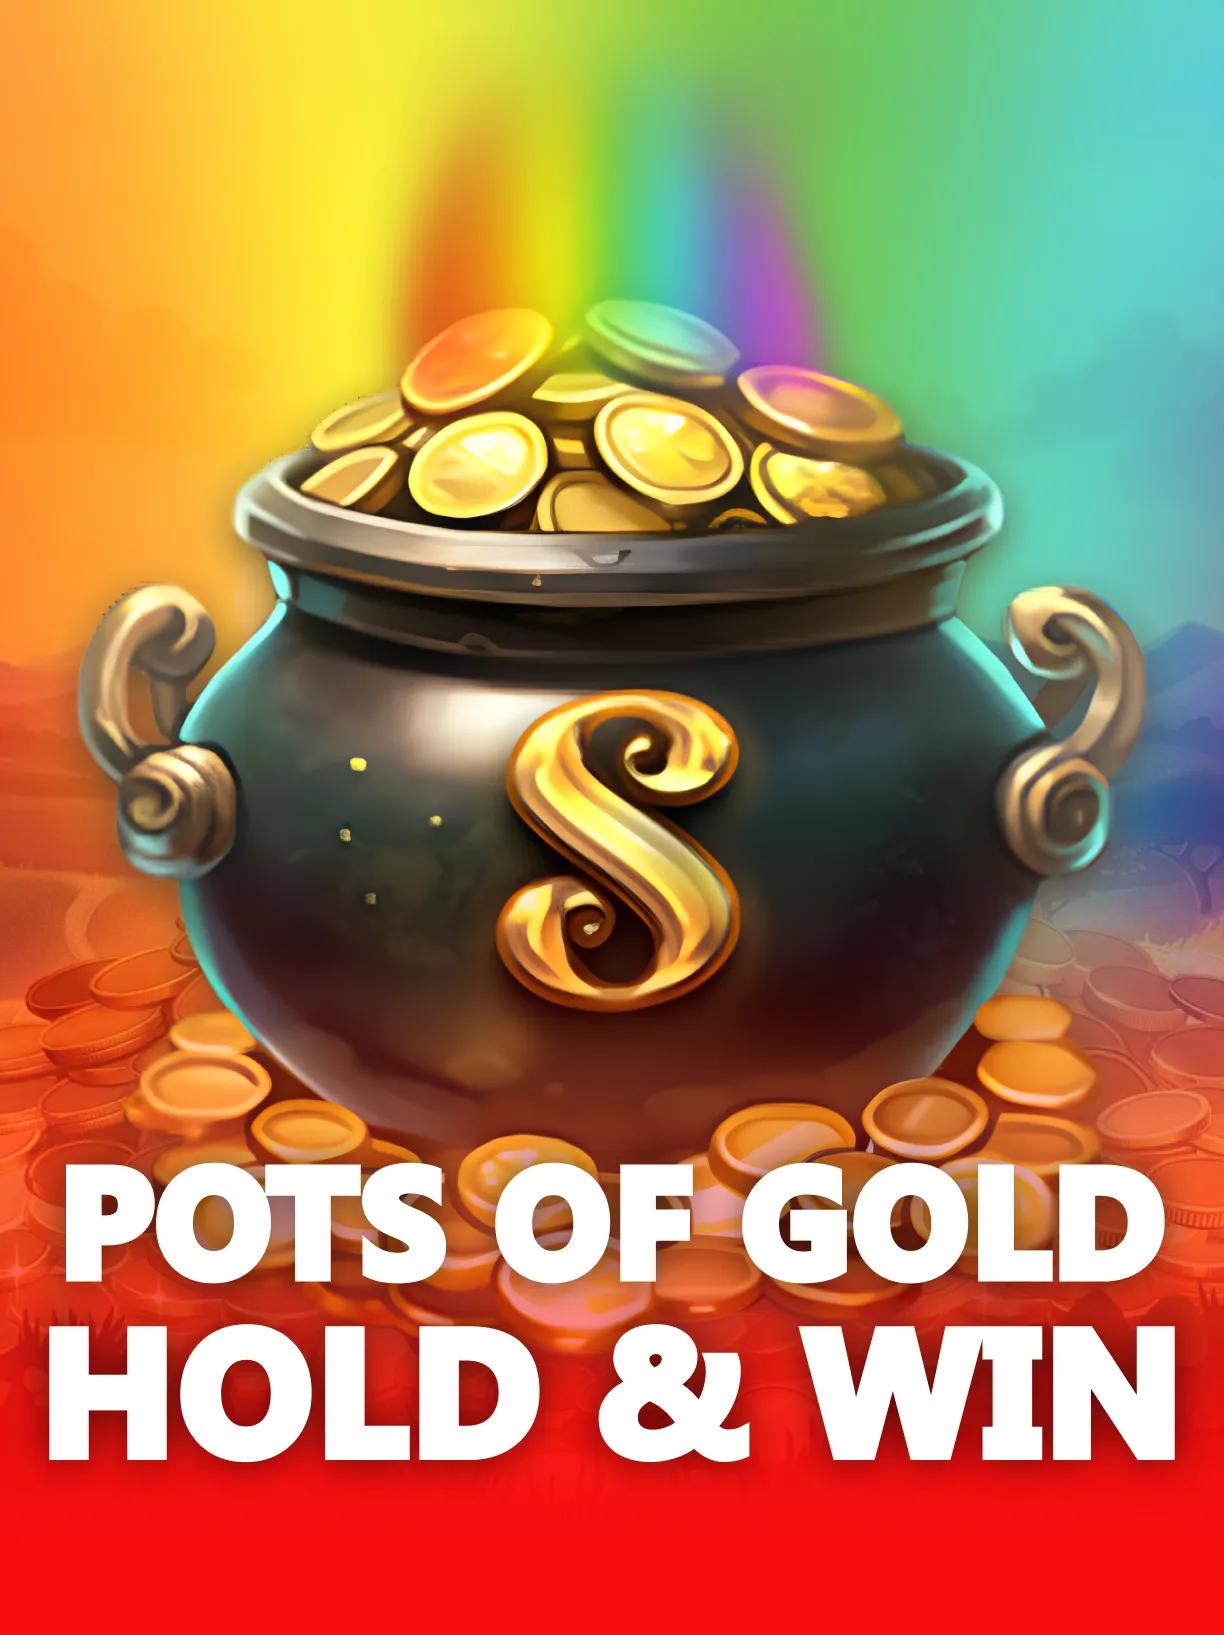 Pots of Gold - Hold & Win